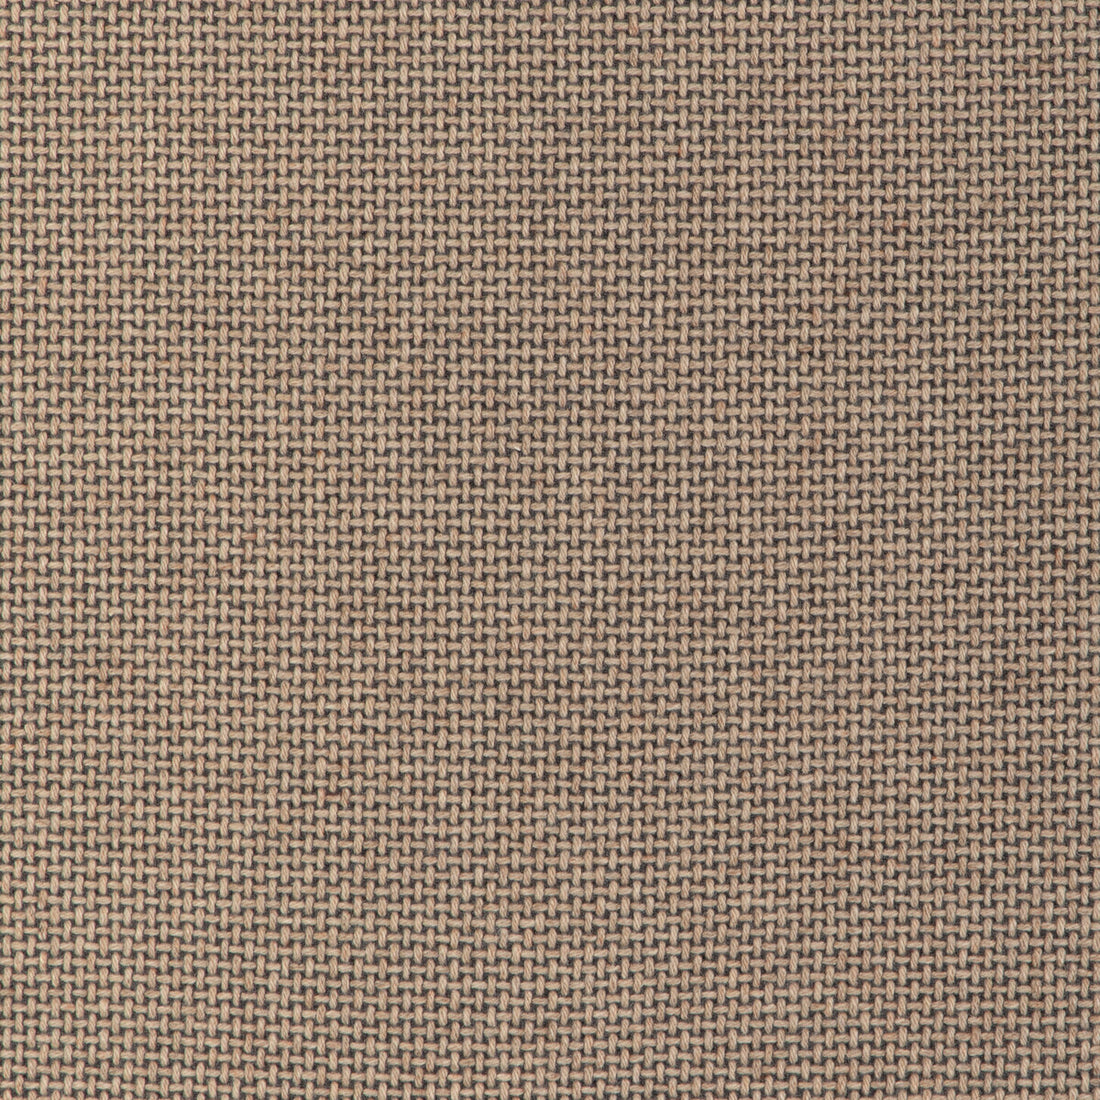 Easton Wool fabric in malt color - pattern 37027.1621.0 - by Kravet Contract